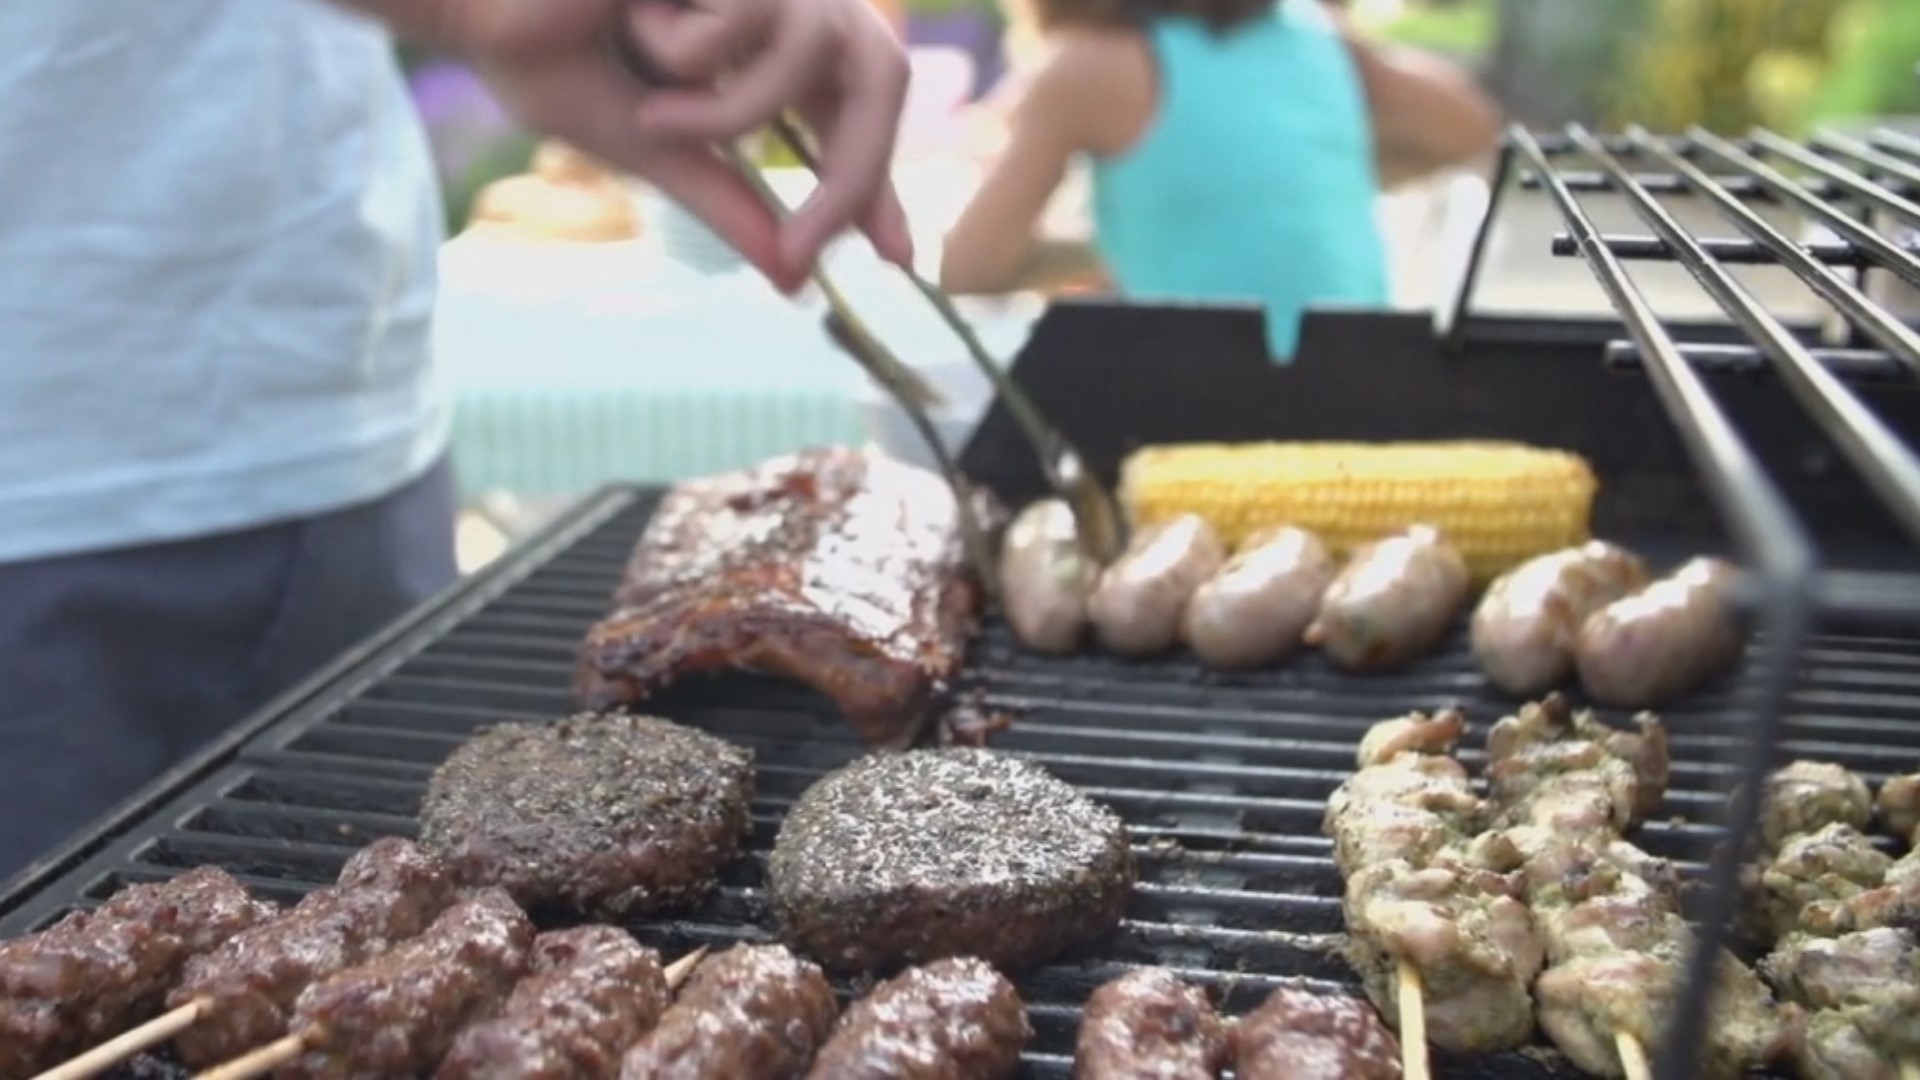 Whether you’re a natural-born griller or an amateur, Monday, May 16, 2022, is a great day to get your grillin’ on.